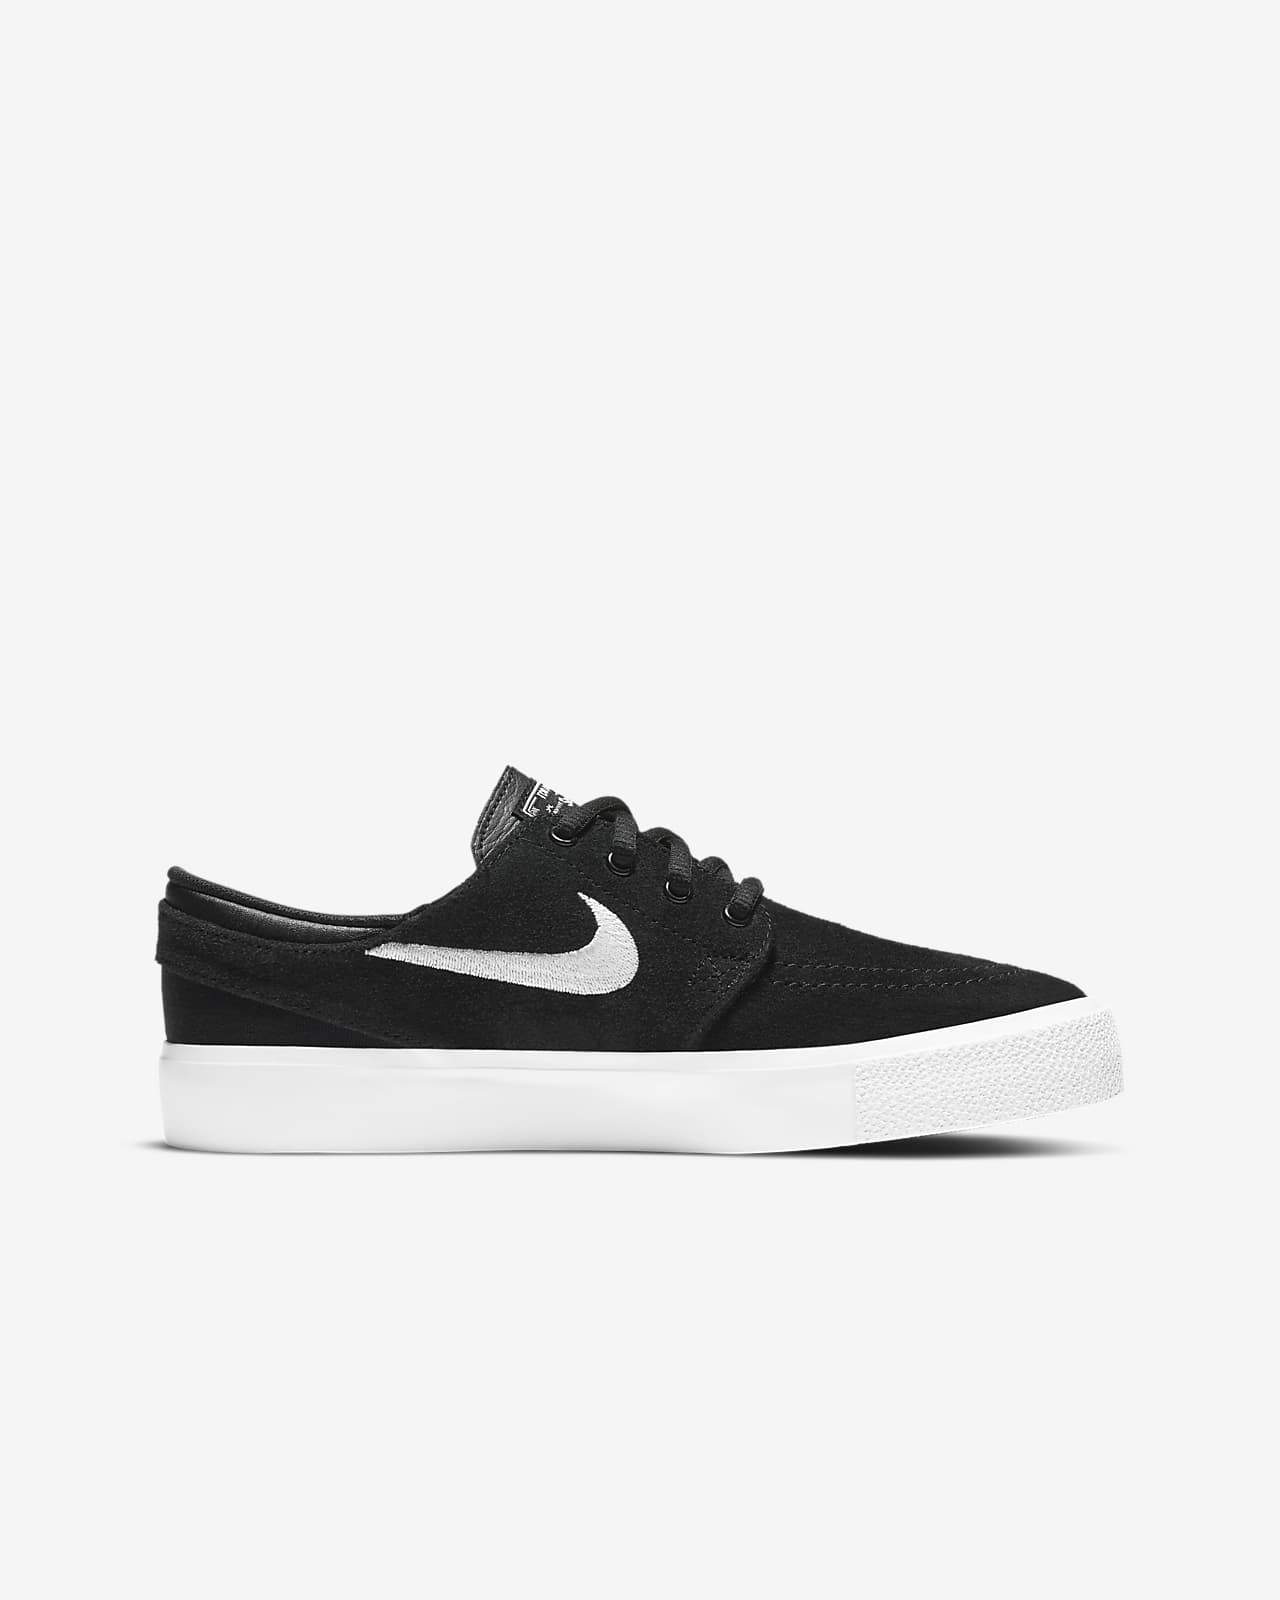 janoskis for kids